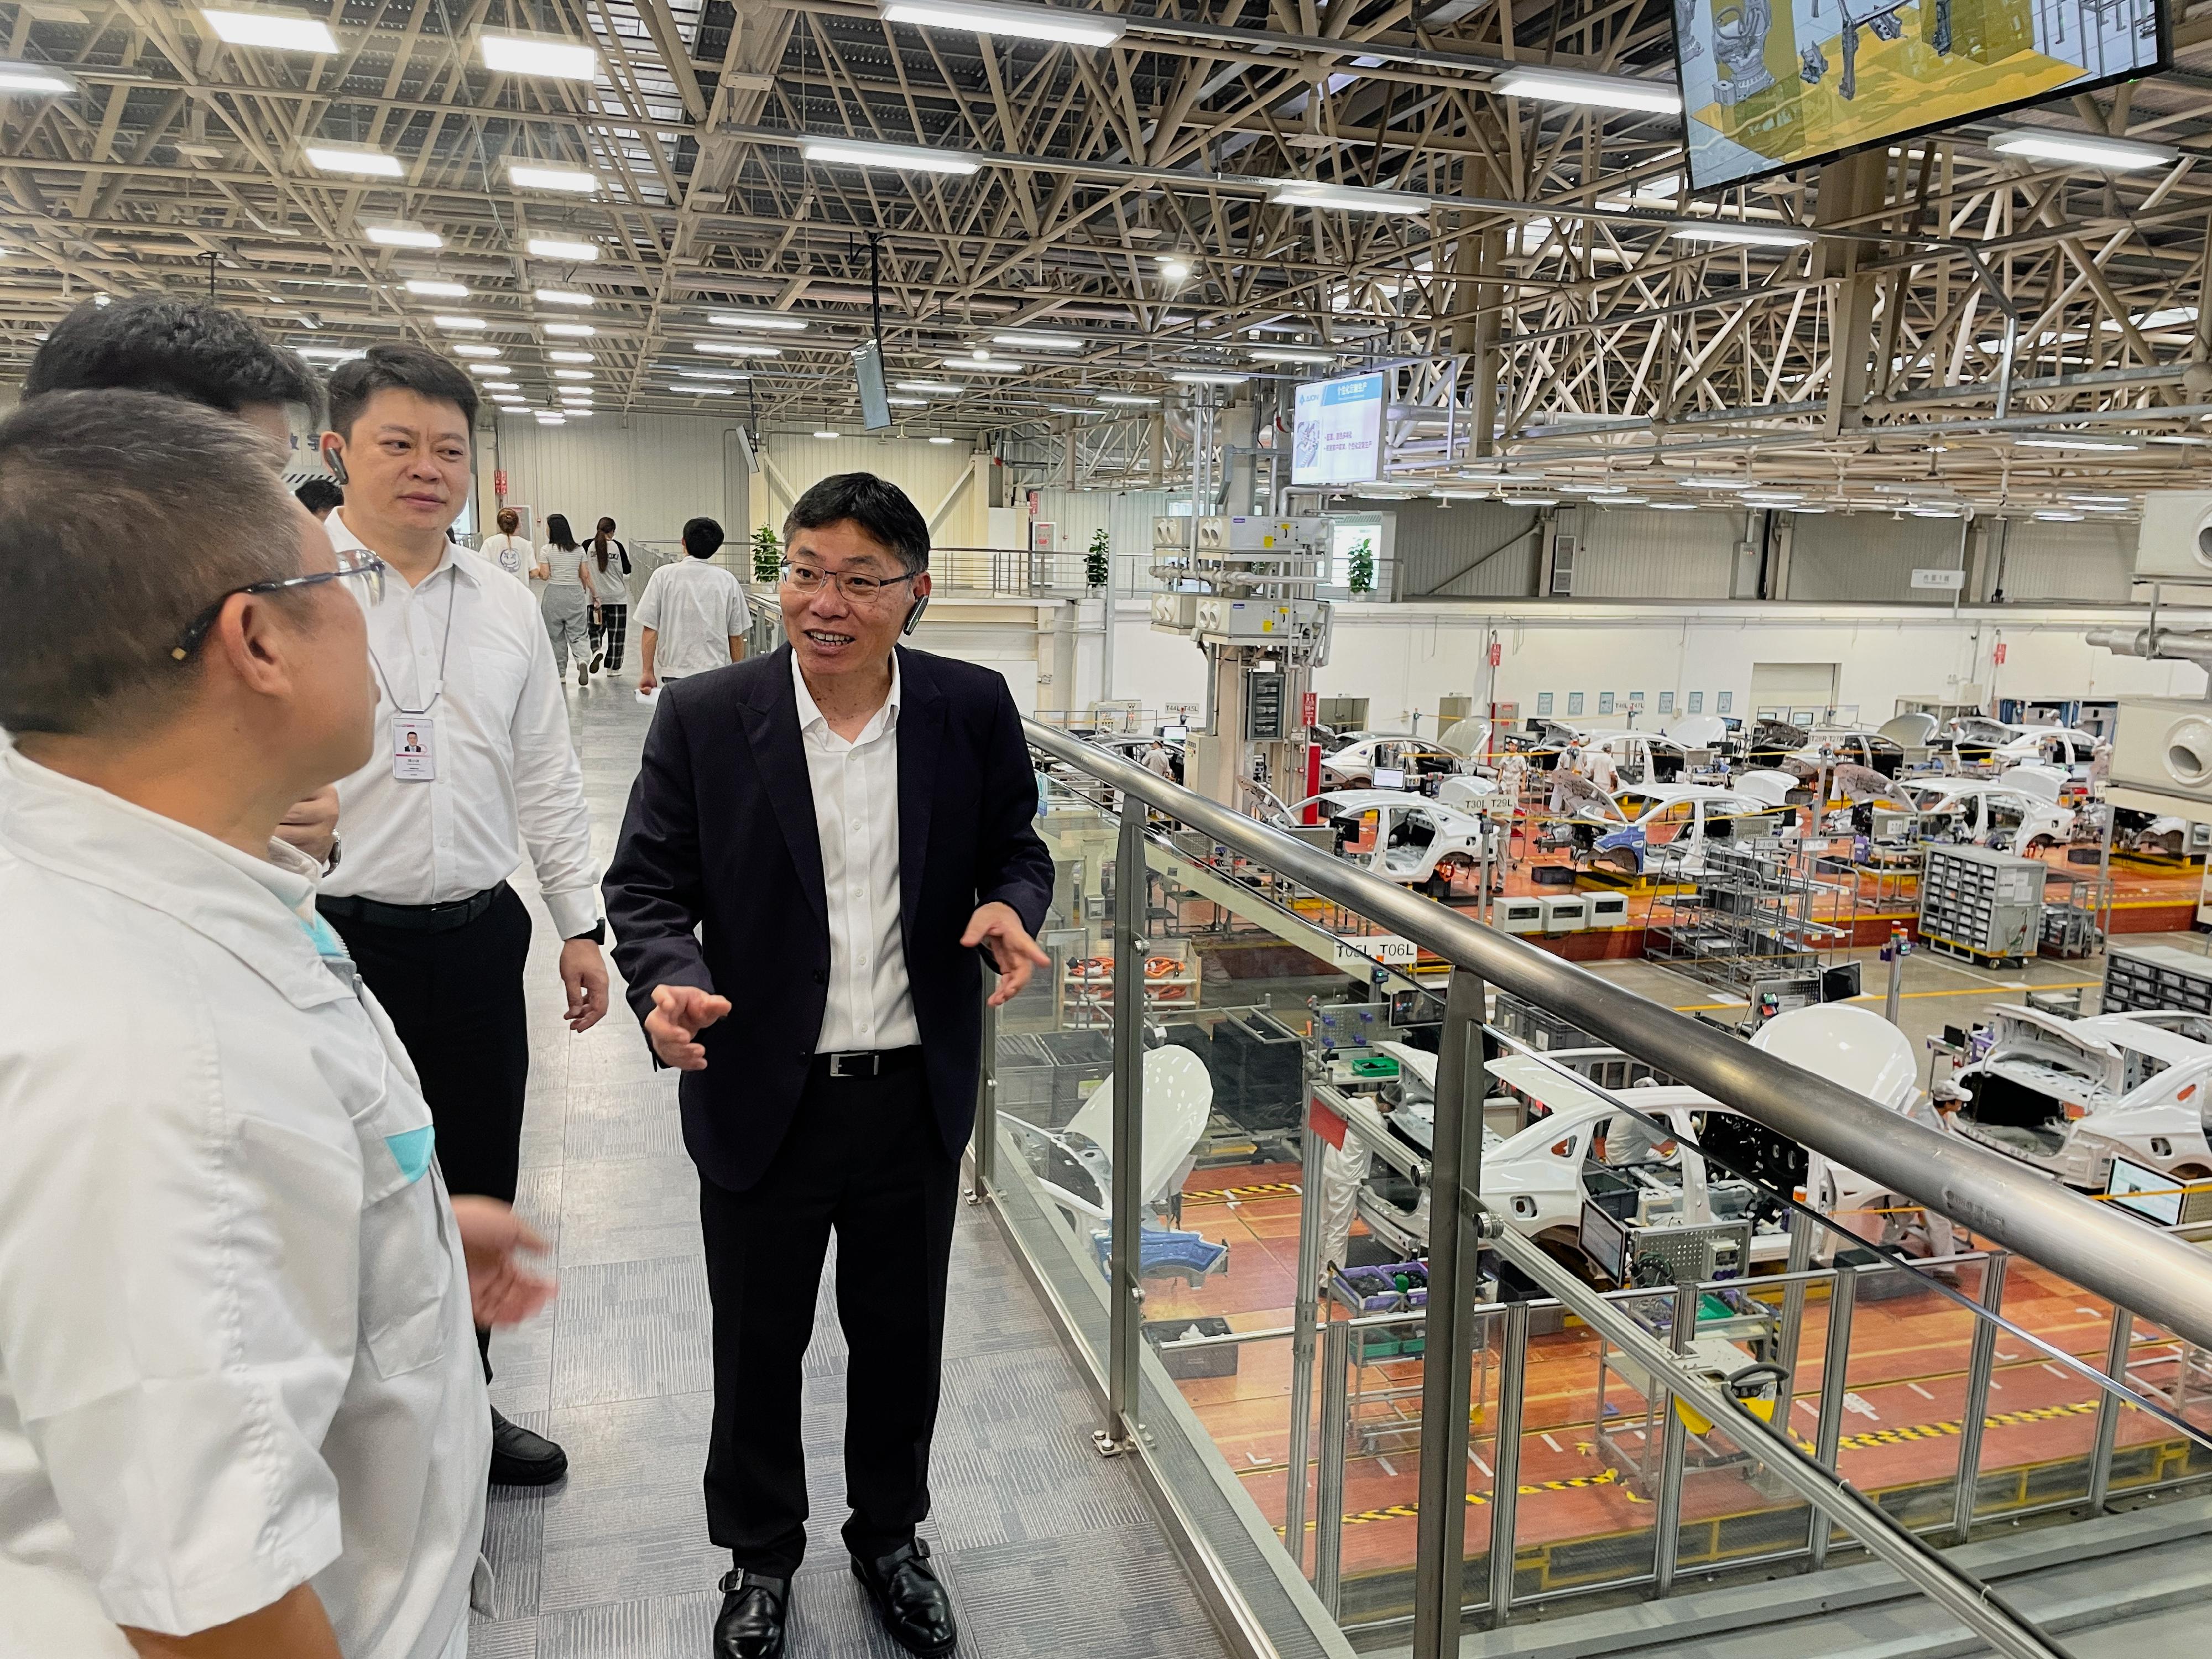 The Secretary for Transport and Logistics, Mr Lam Sai-hung, began a two-day visit to Guangzhou today (September 20) to better understand the latest developments in smart mobility there. Photo shows Mr Lam (right) visiting Guangzhou Automobile Group Co. Ltd (GAC) to understand the research and development work of the GAC's autonomous driving technology and new energy commercial vehicles in recent years.